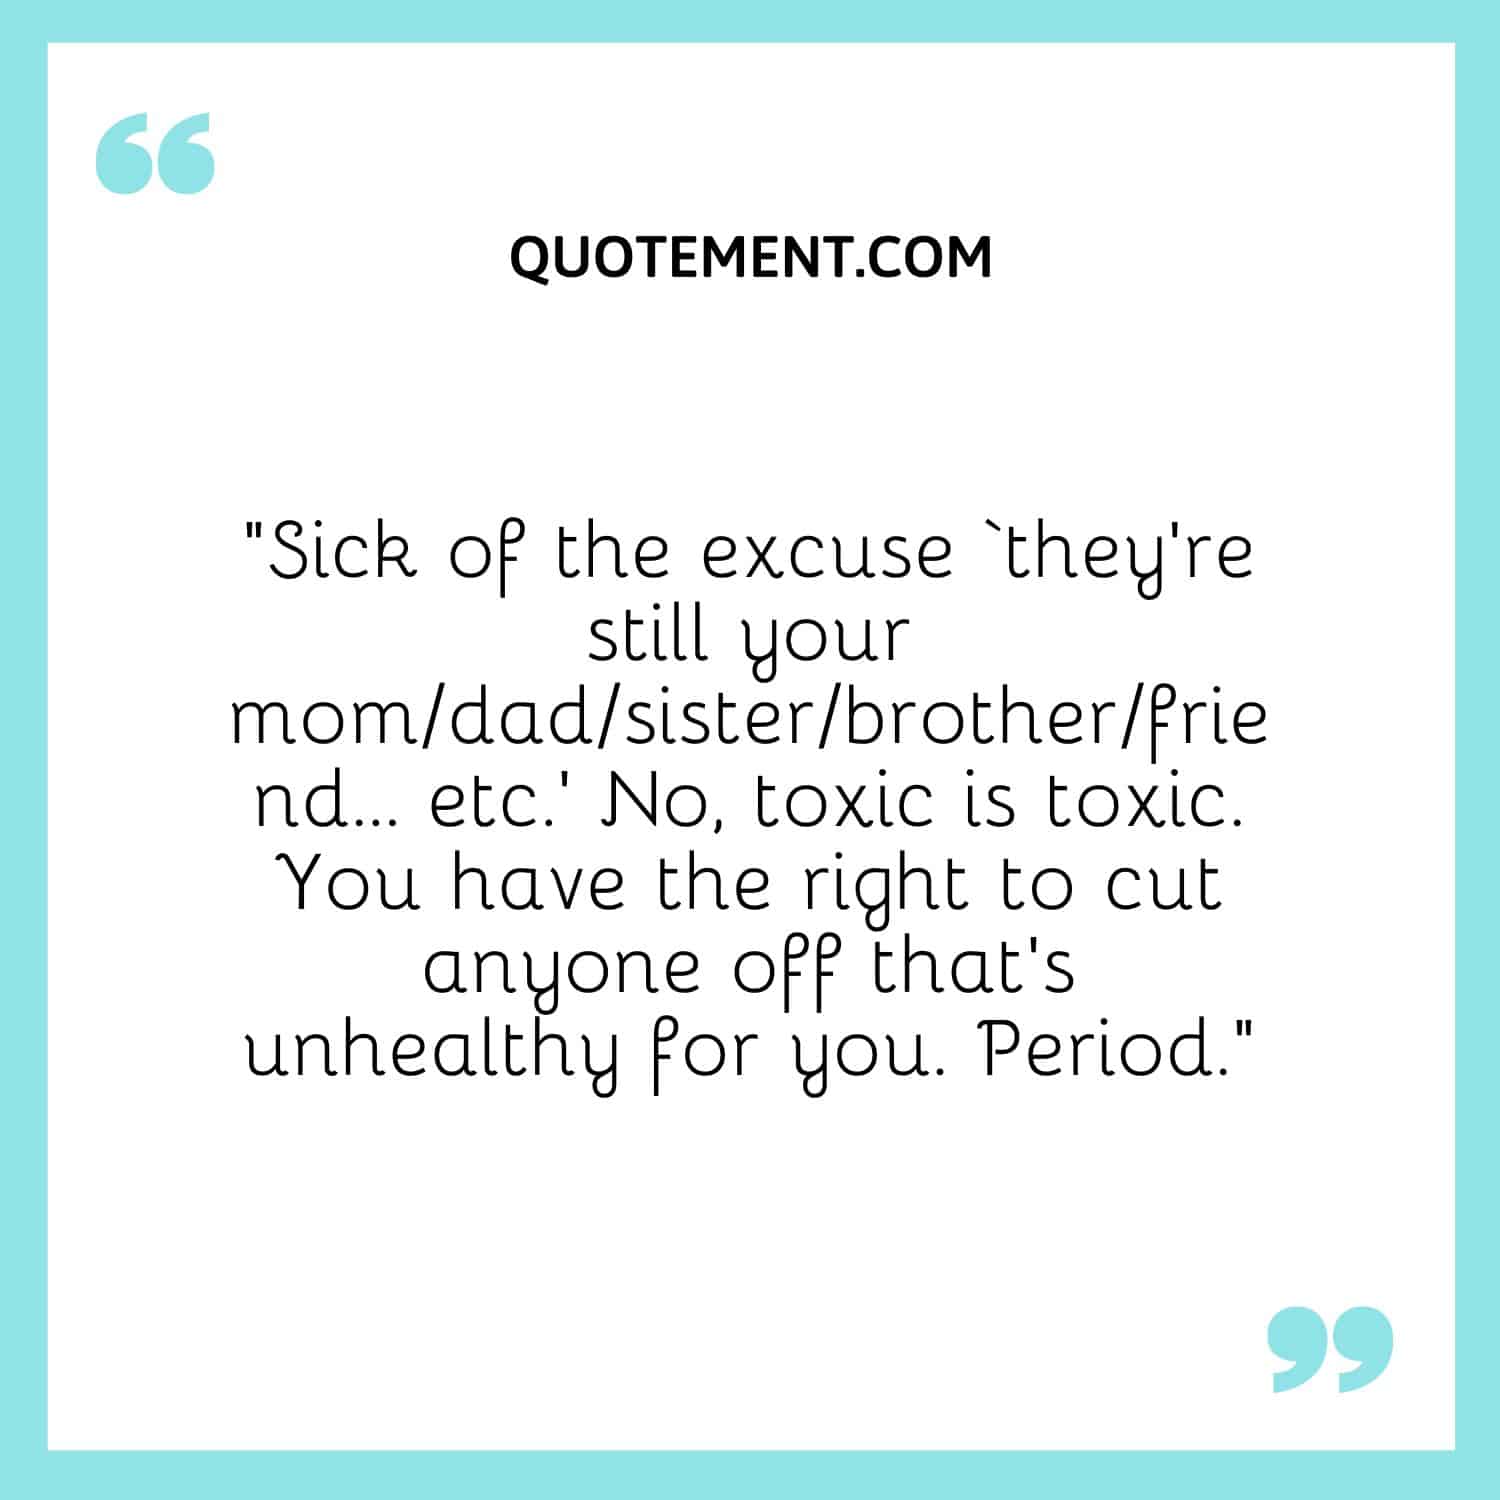 “Sick of the excuse ‘they’re still your momdadsisterbrotherfriend… etc.’ No, toxic is toxic. You have the right to cut anyone off that’s unhealthy for you. Period.”